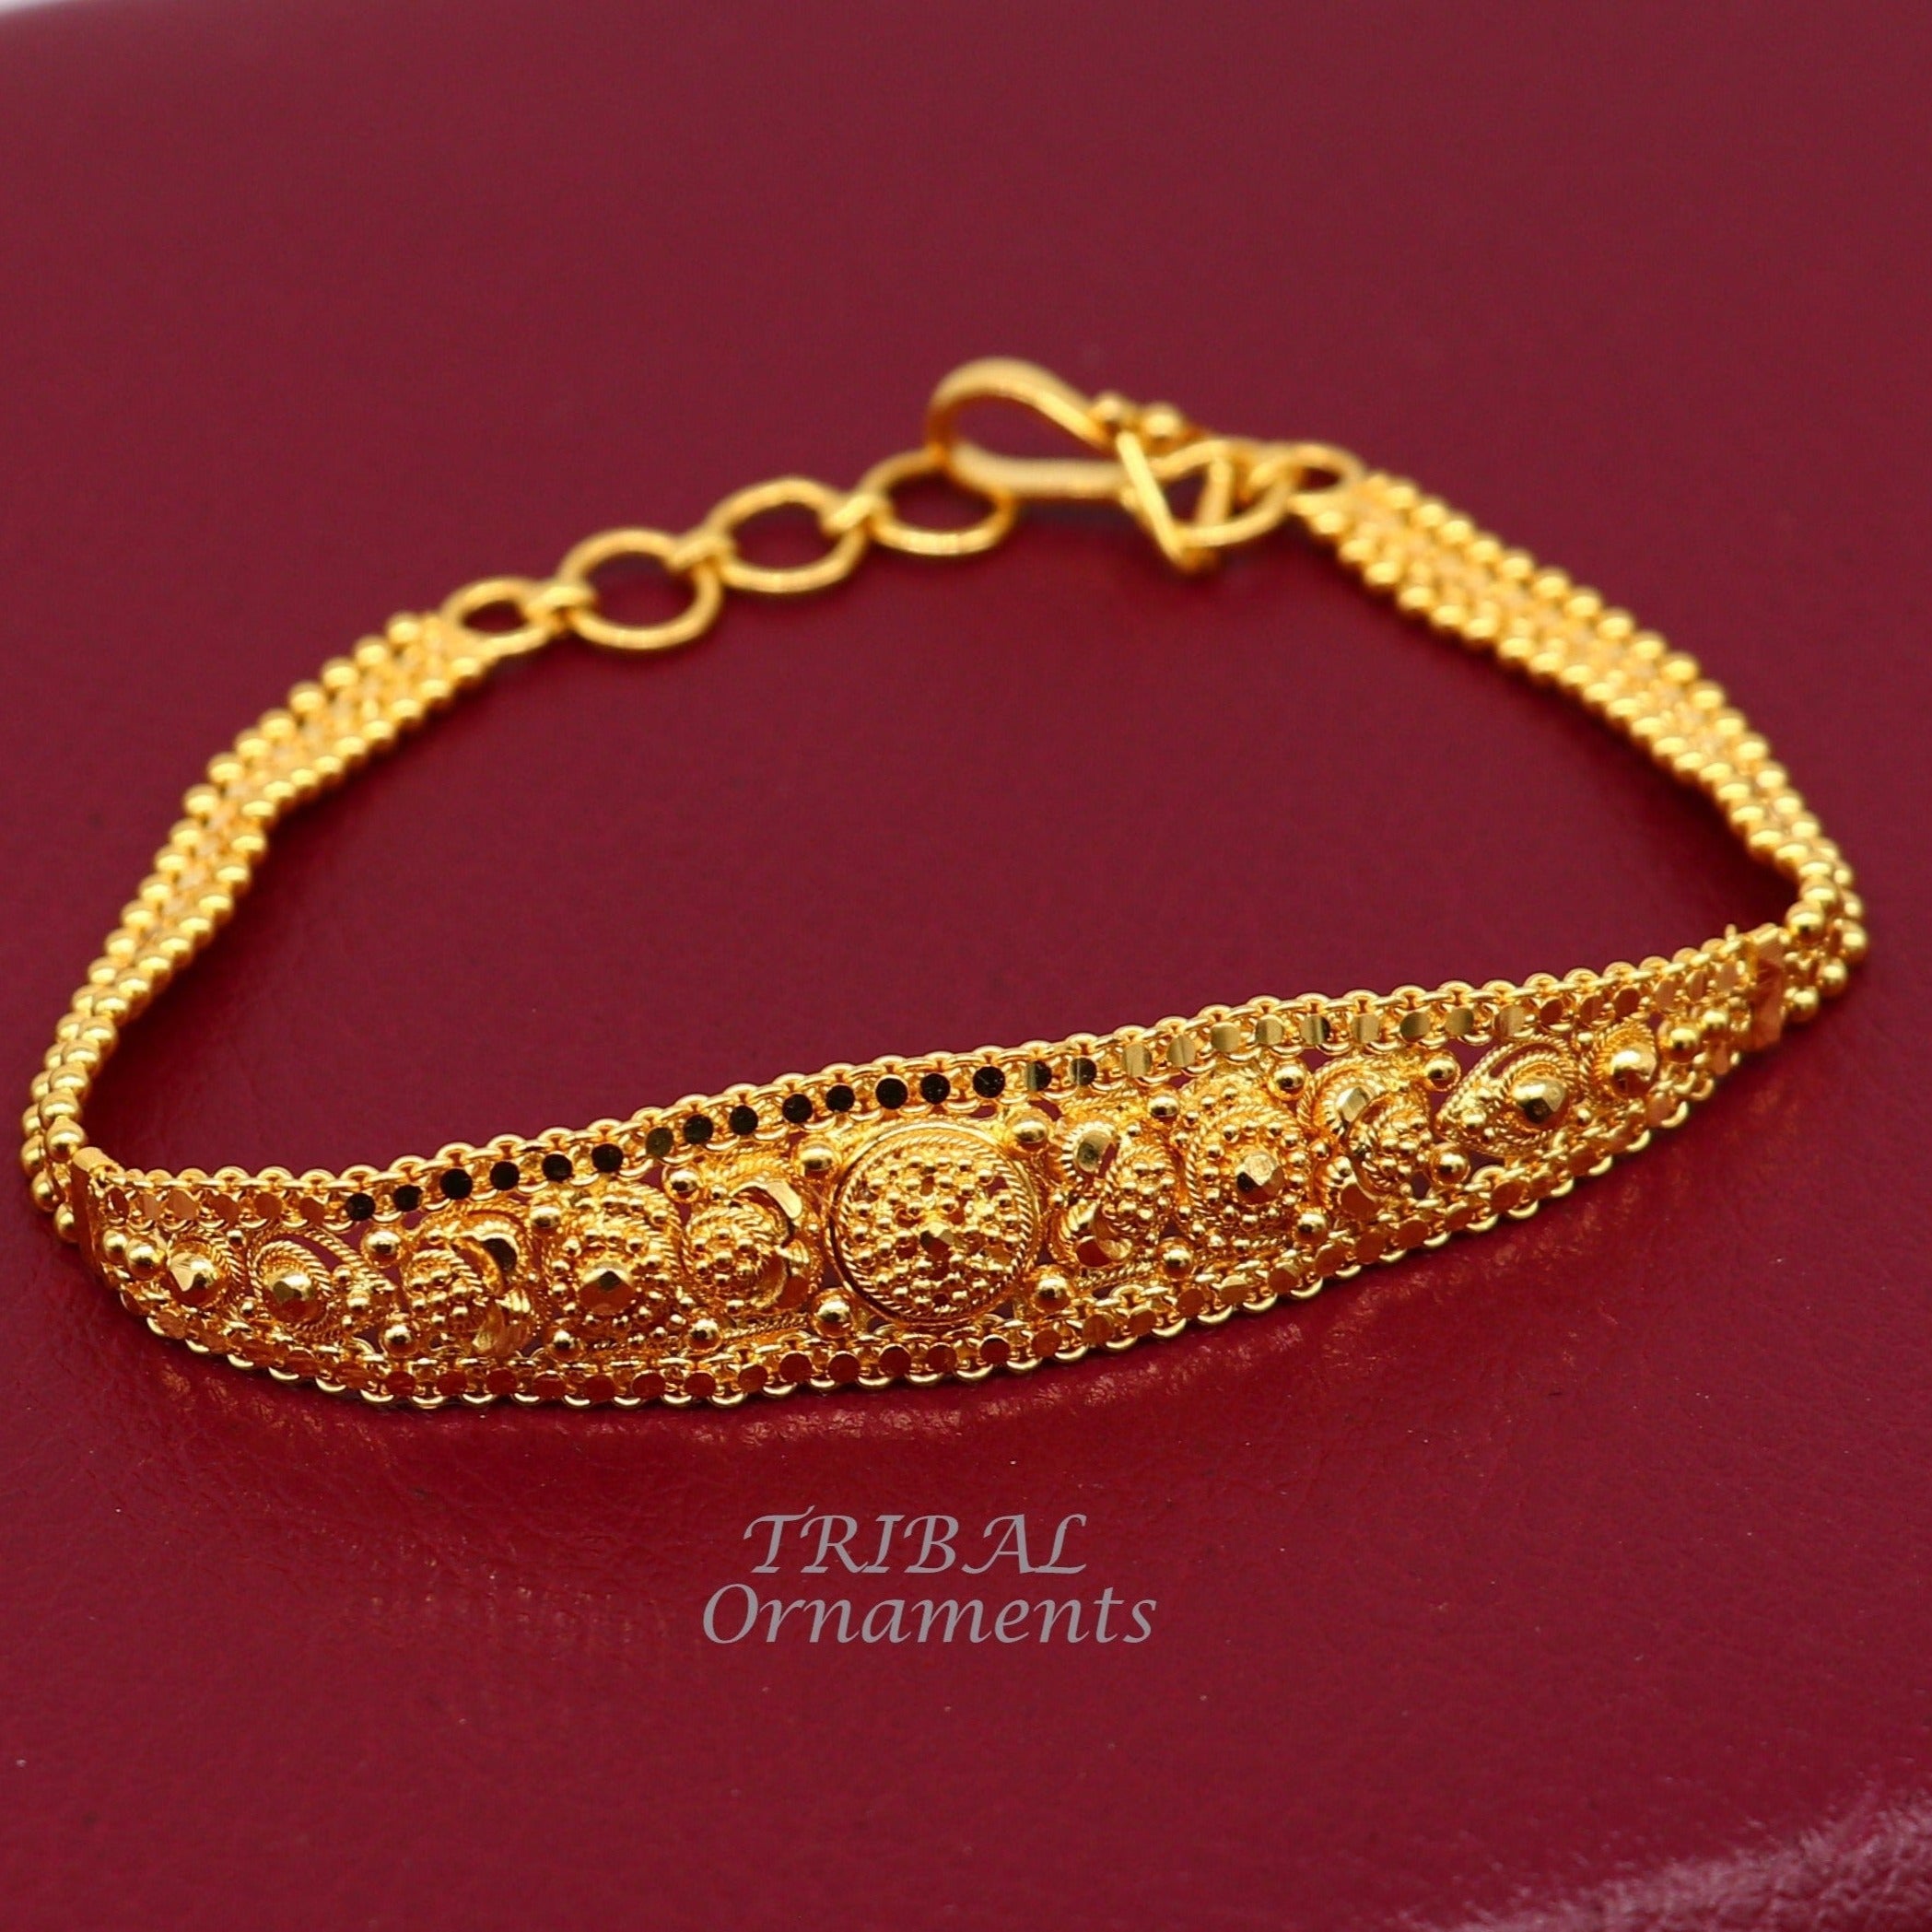 22K Gold Bracelet for Teenagers & Women - Extra Small Size - 235-GBR3281 in  4.450 Grams